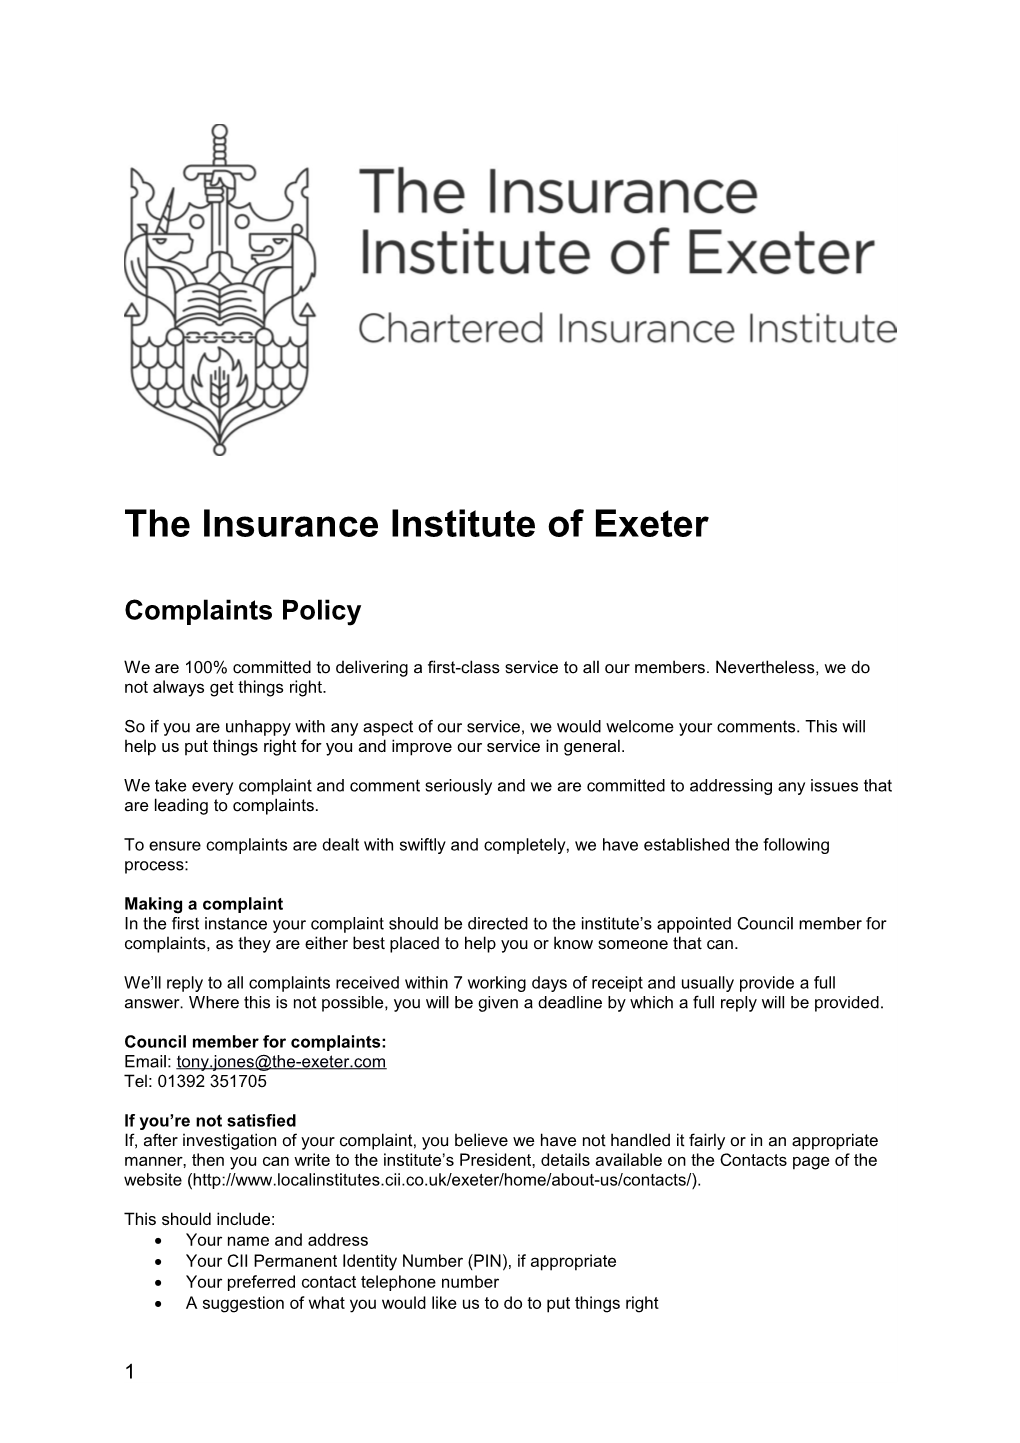 The Insurance Institute of Exeter